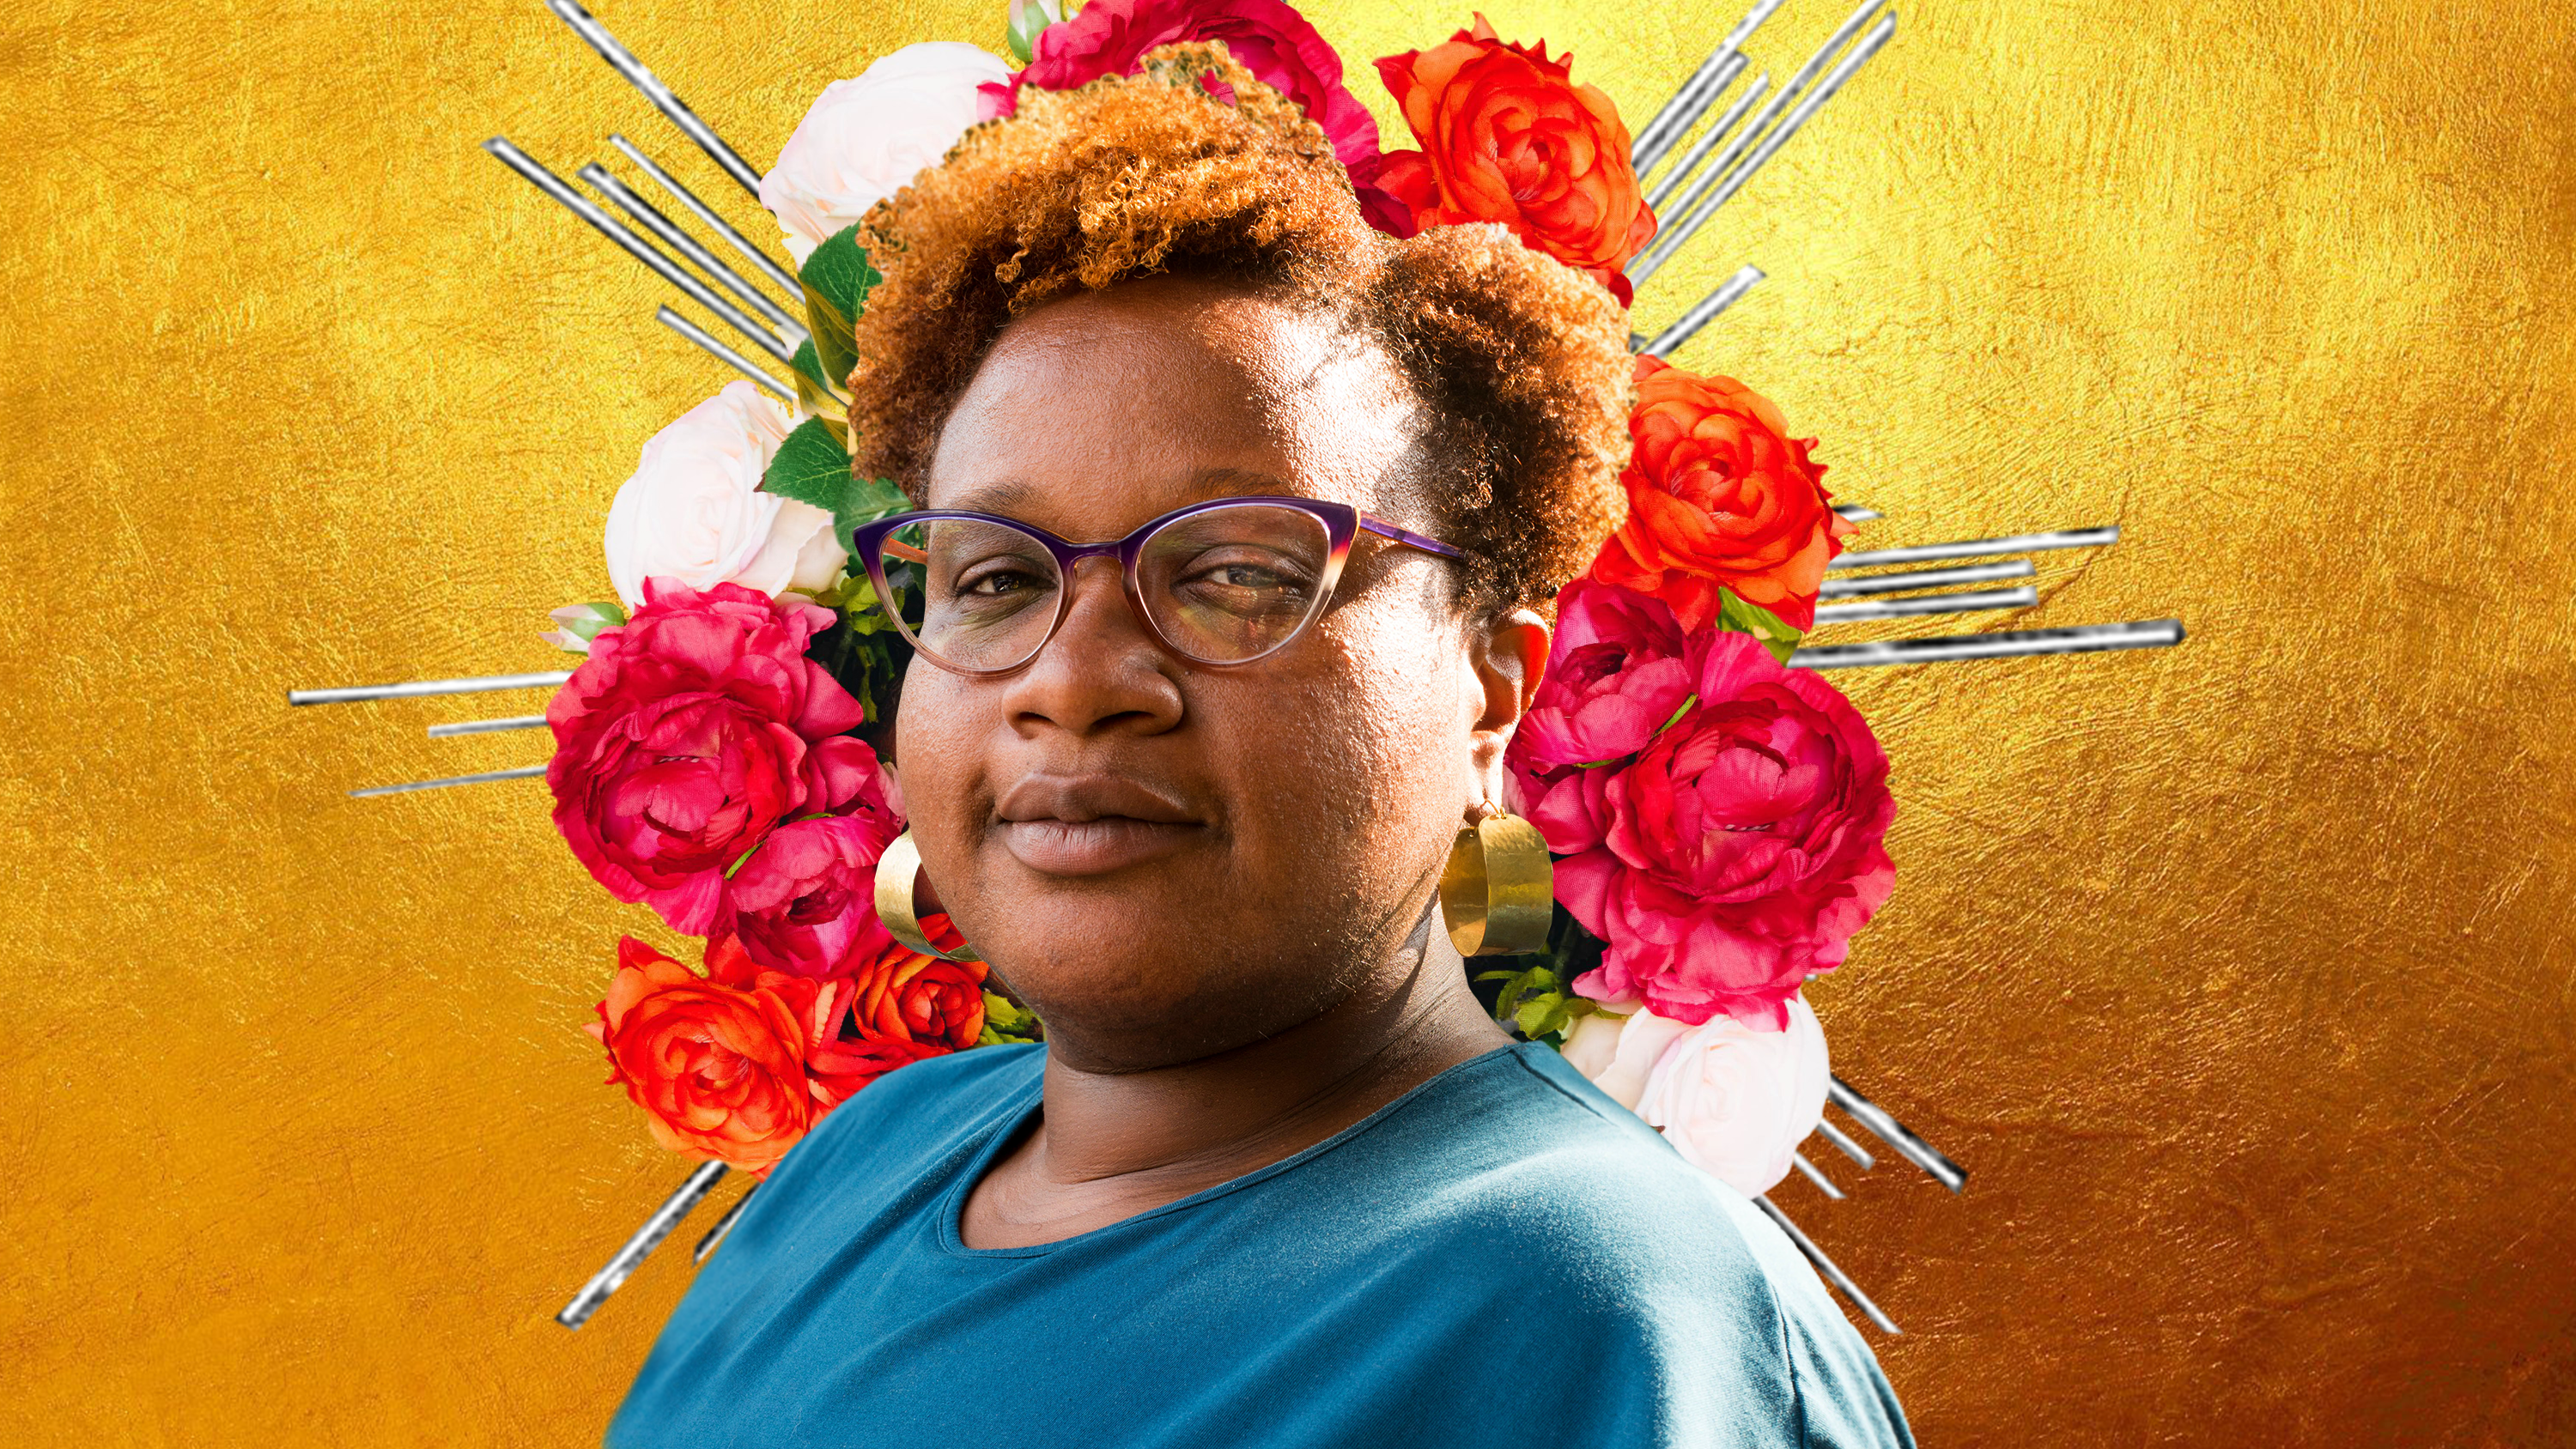 Image: Portrait of Erin Glasco wearing a teal dress, copper hoop earrings, purple glasses and a slight smile on their face. Behind them is a bouquet of pink, white, and red flowers. The image is super-imposed on a textured golden background. This digital collage and the portrait were created by Ireashia Bennett, who will create a series of portraits with added flair and personality.